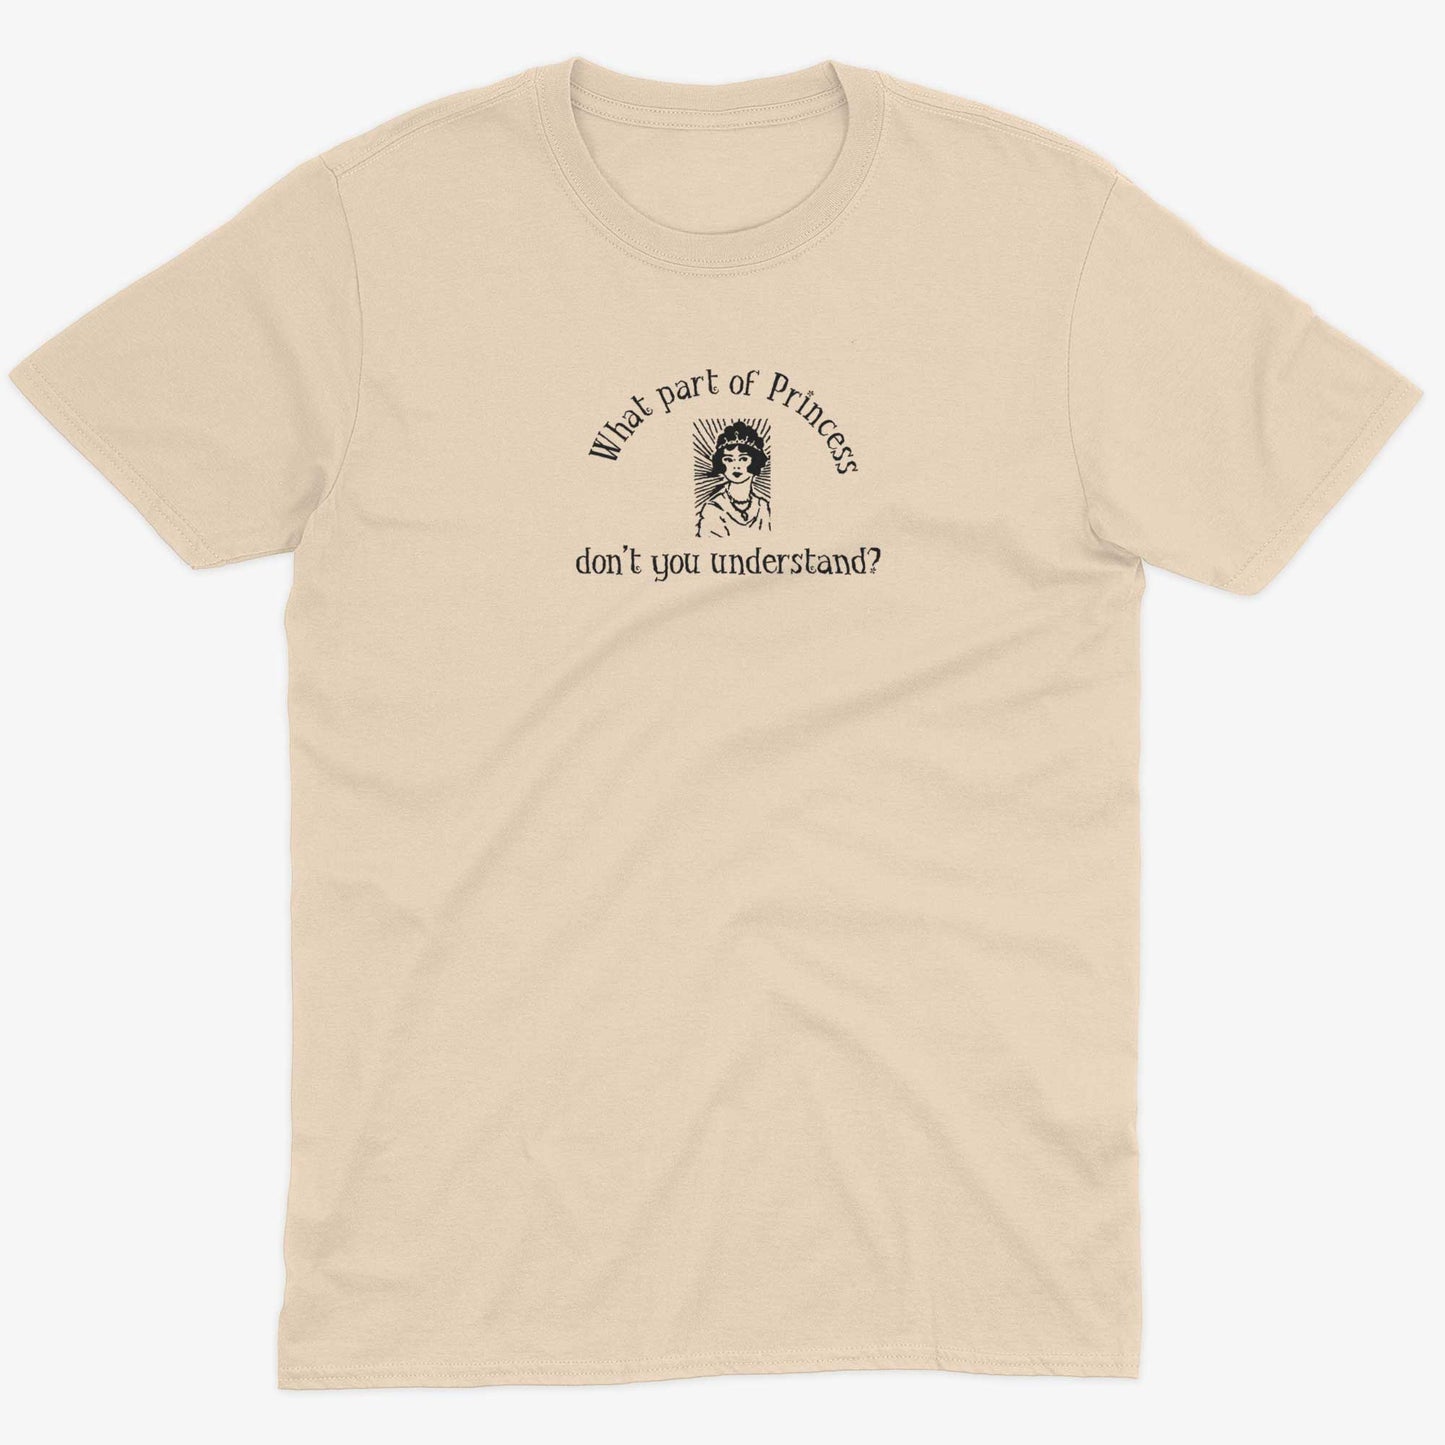 What Part Of Princess Don't You Understand? Unisex Or Women's Cotton T-shirt-Organic Natural-Unisex